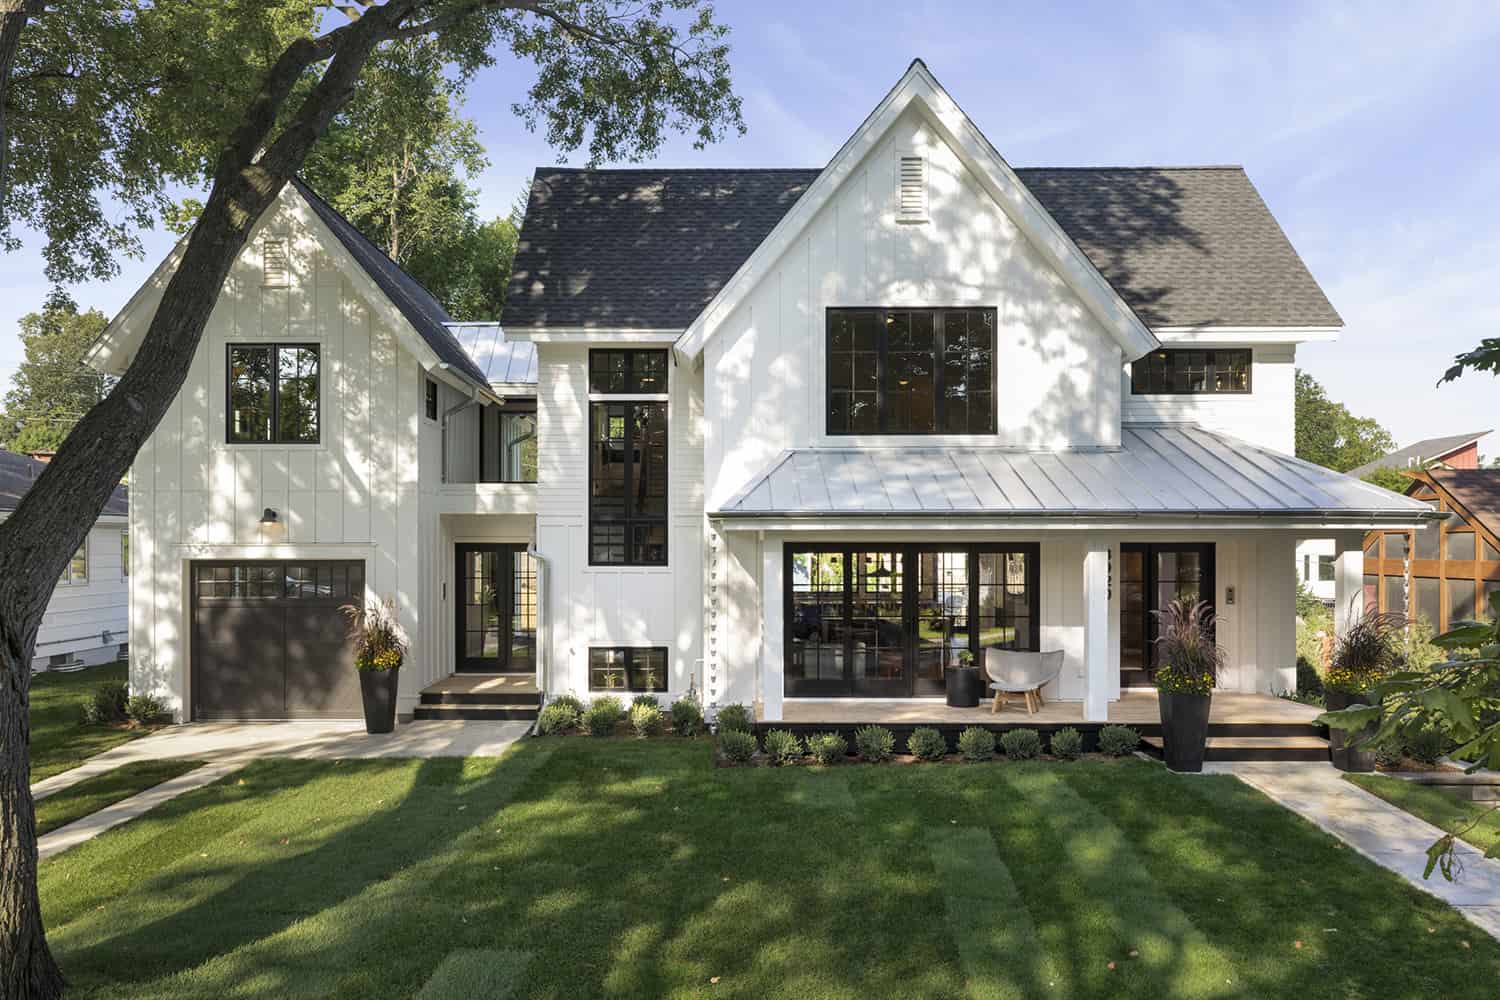 A stunning urban farmhouse gets a dose of universal design in Minnesota